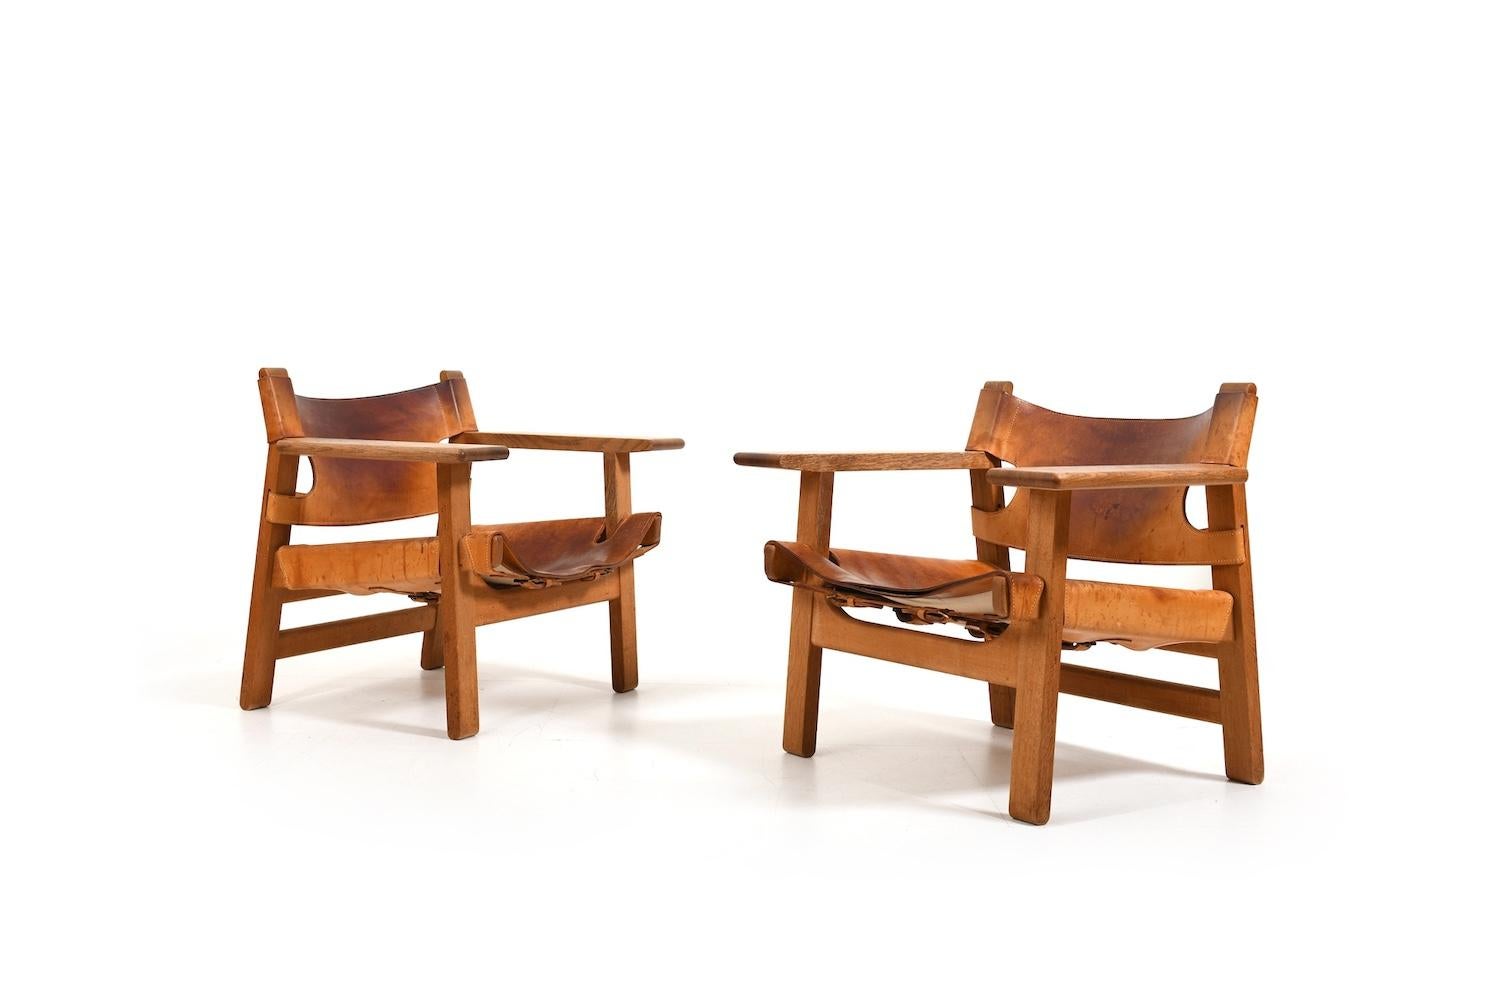 Beautiful old pair of Børge Mogensen’s spanish chair. Designed 1958 for Fredericia Stolefabrik Denmark. Model BM2226. Old edition. Made in solid oak and natural leather. Produced early 1960s. We decided not to do anything to these chairs. That's how